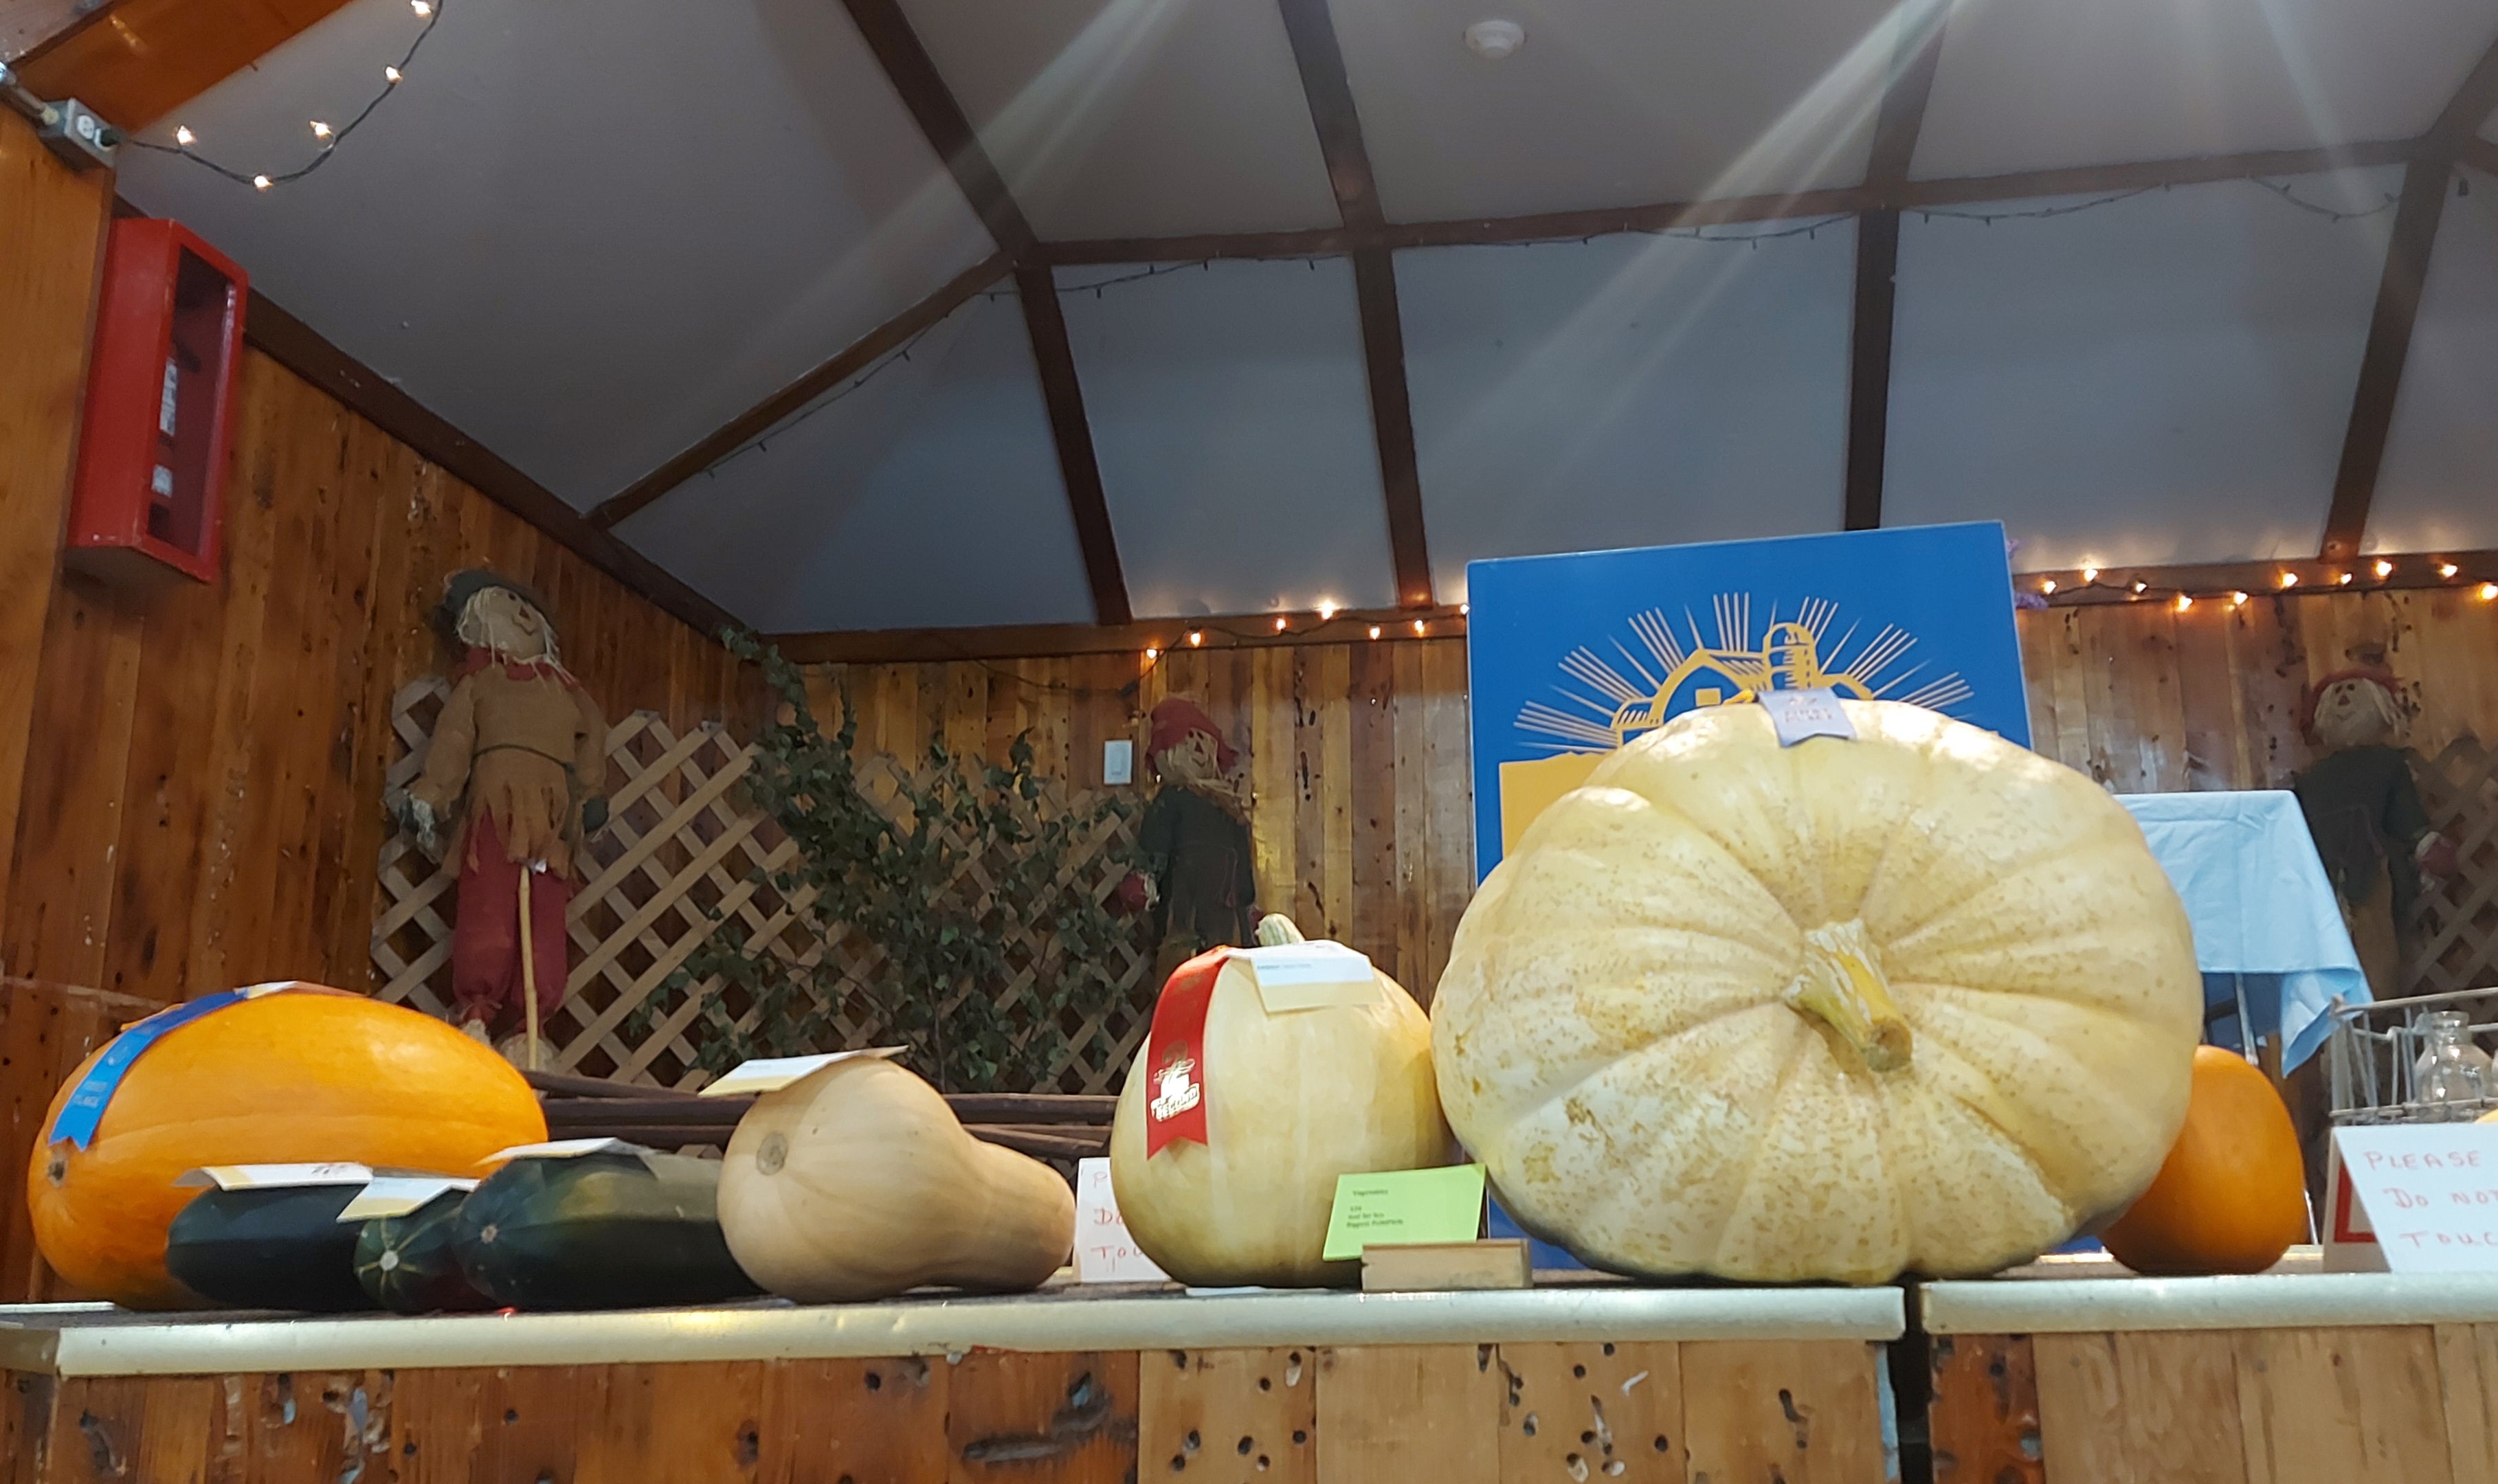 Prize pumkins and squash from 2022 fair displayed on stage